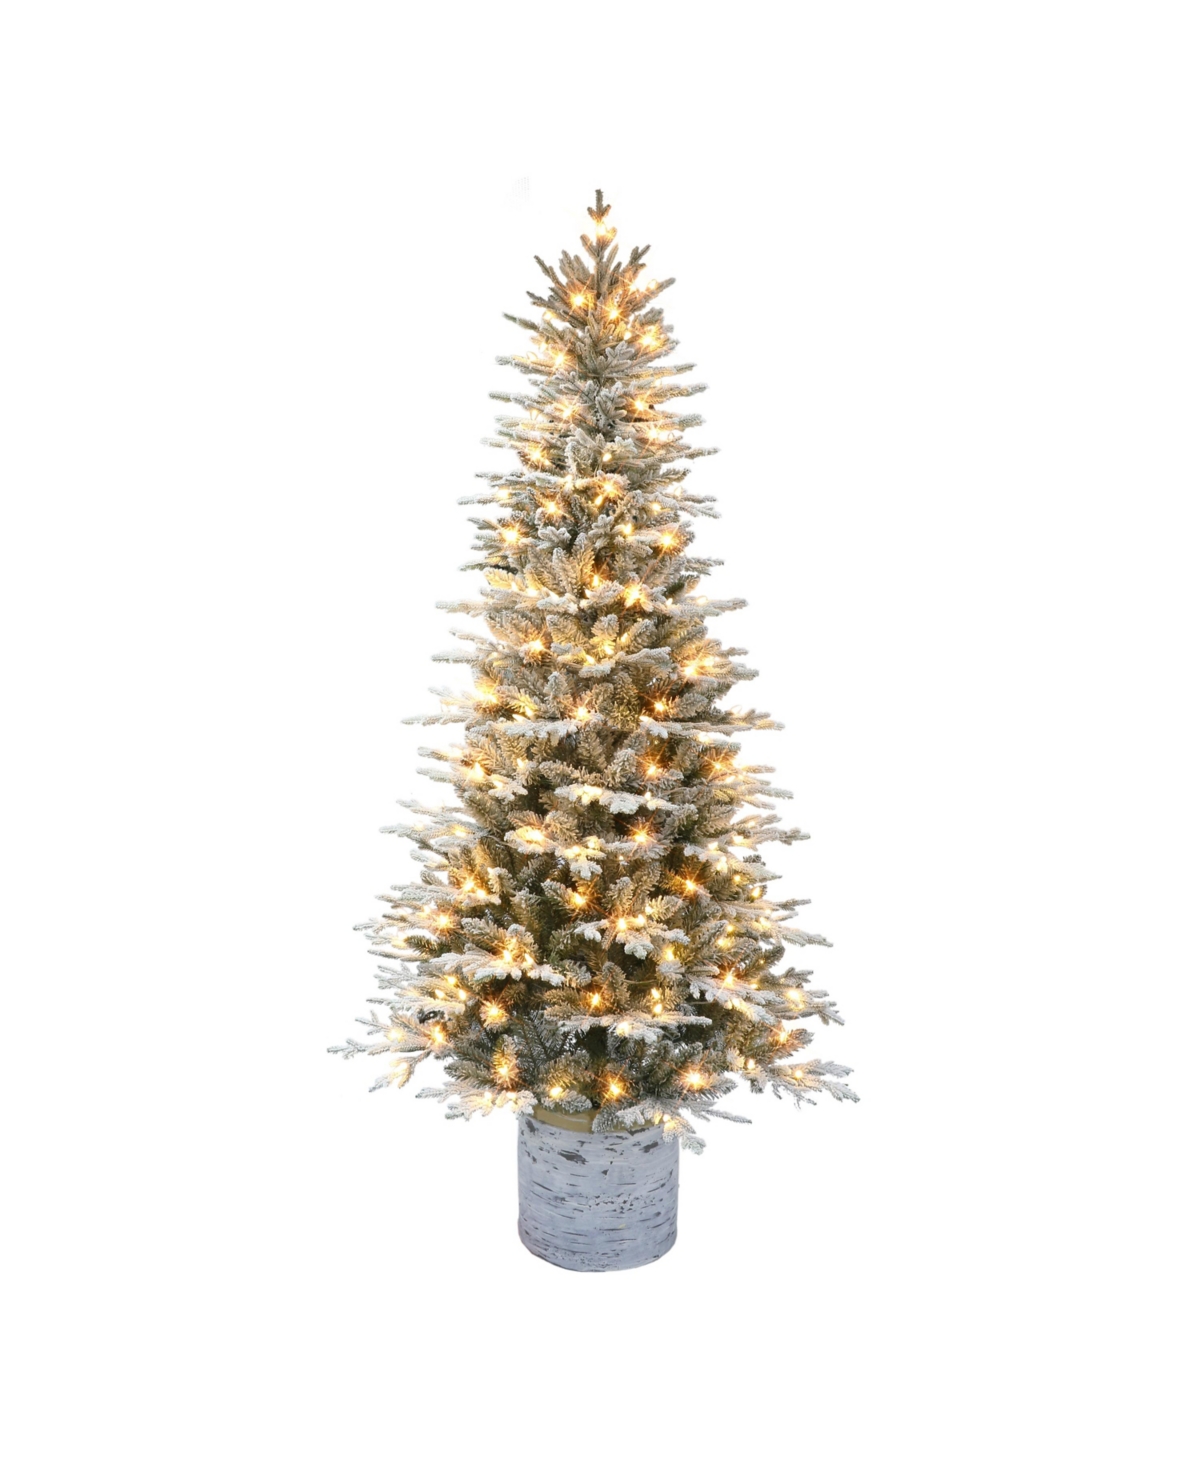 Puleo 7.5' Pre-lit Potted Flocked Arctic Fir Tree With 250 Warm White Led Lights And Birch Wood Look Base, In Green